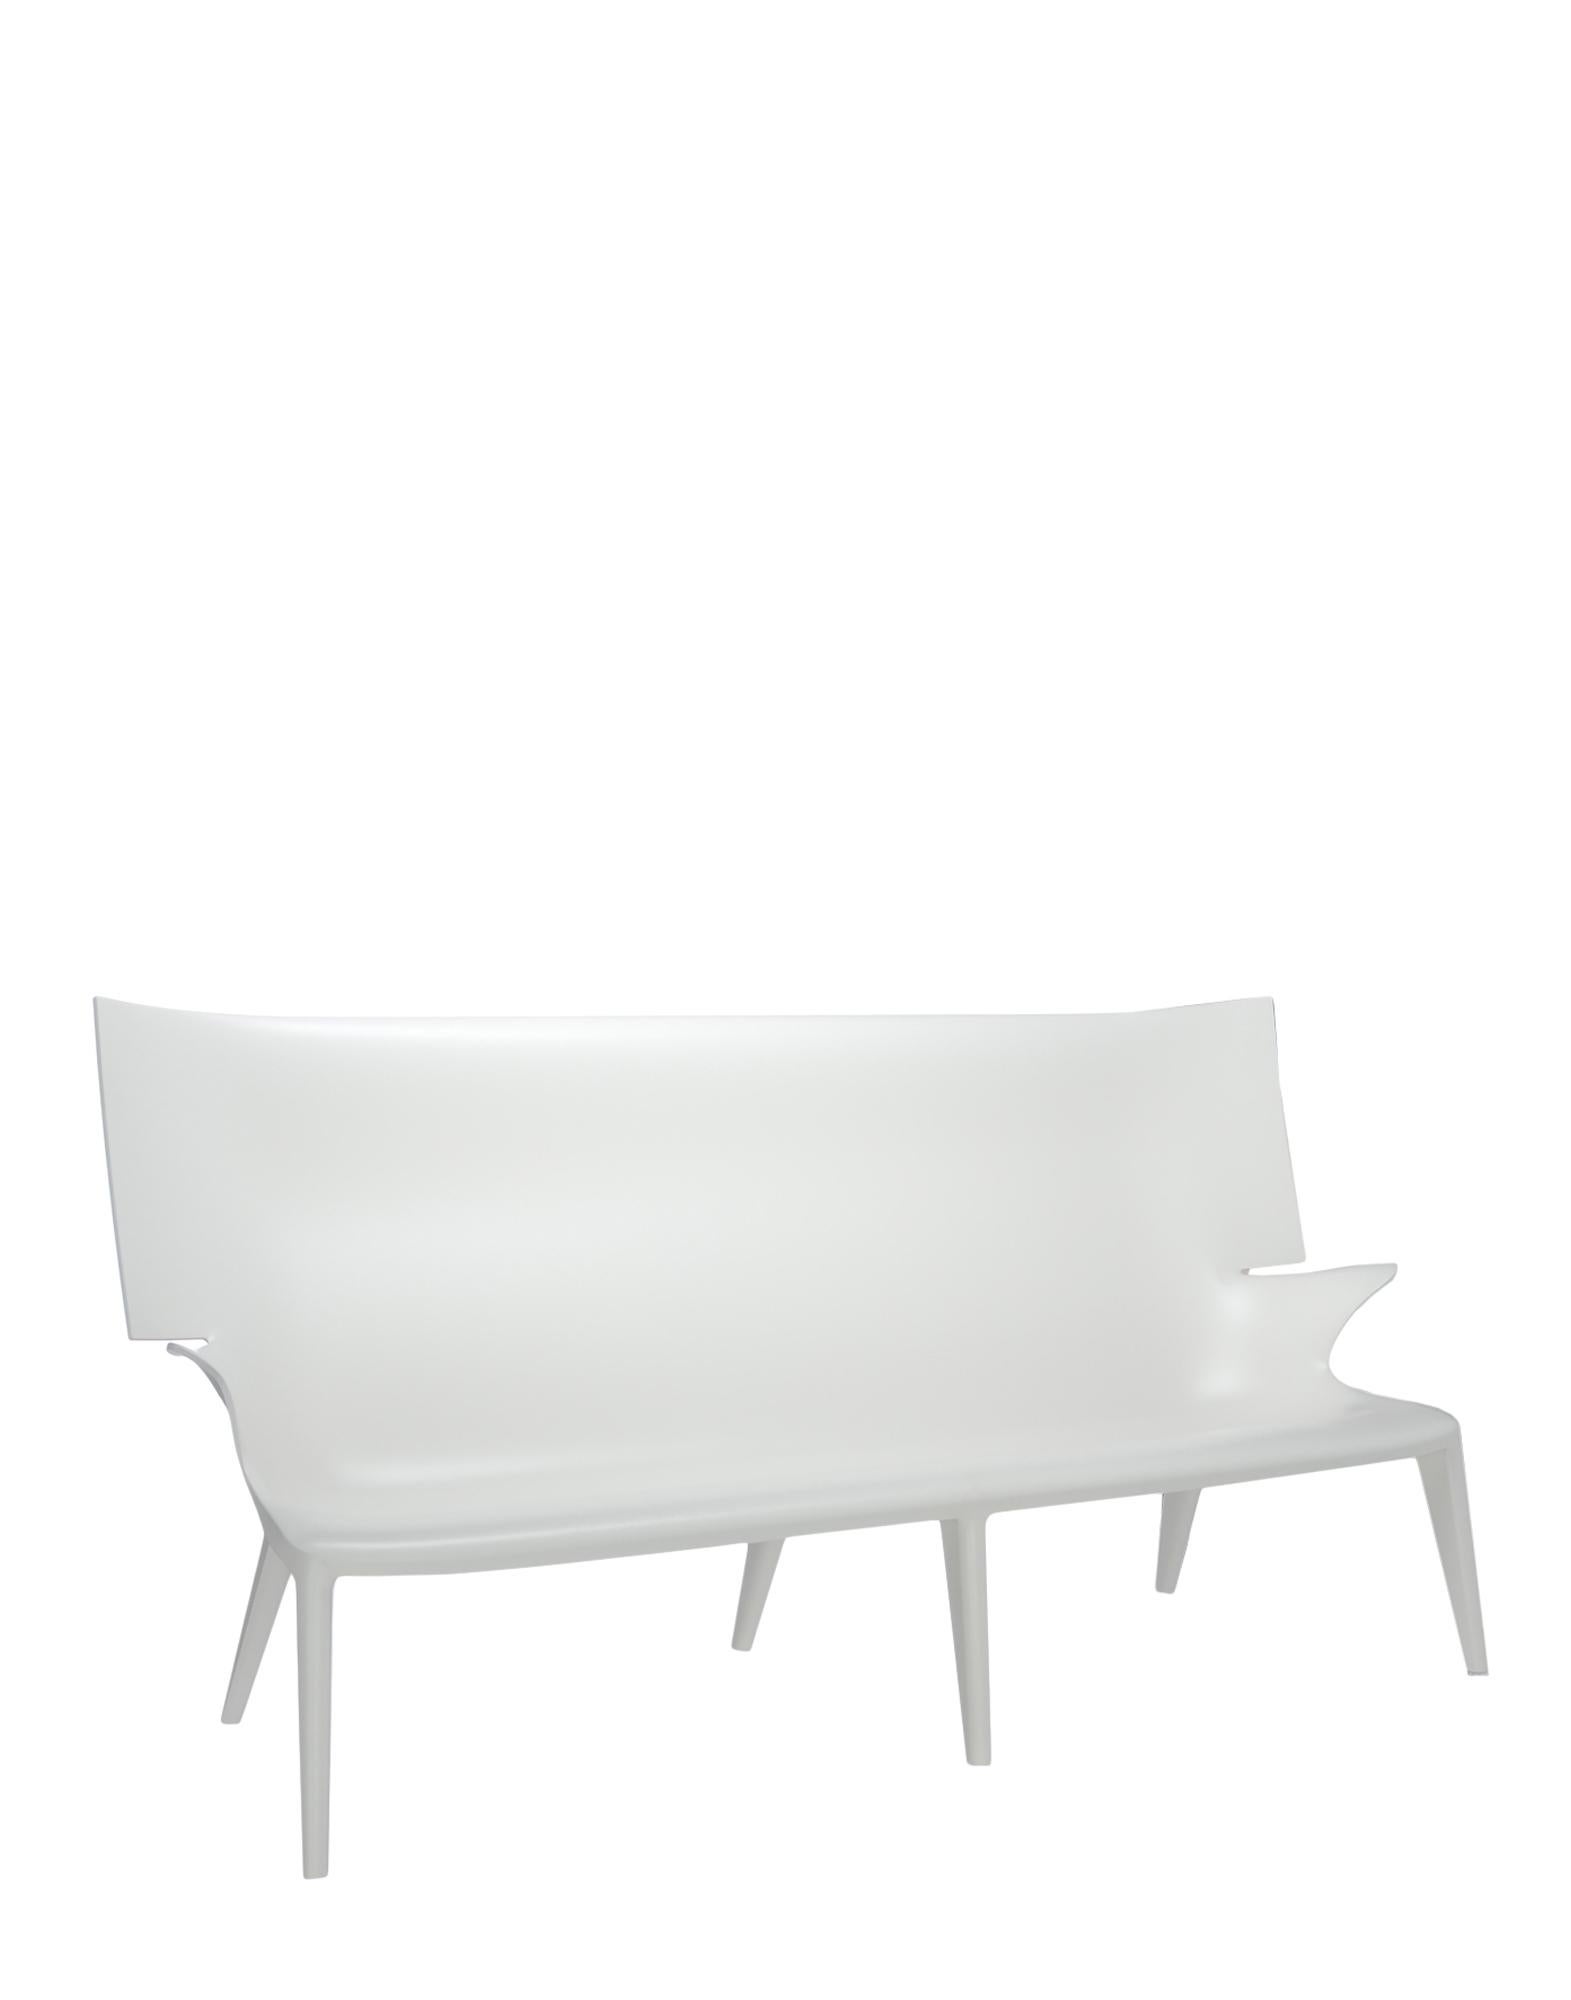 Kartell presents Uncle Jack, the revolutionary single mould transparent polycarbonate sofa signed by Philippe Starck. It is 190 cm long in a single block weighing 30 kg. Uncle Jack is the most daring example in the world of injection moulding